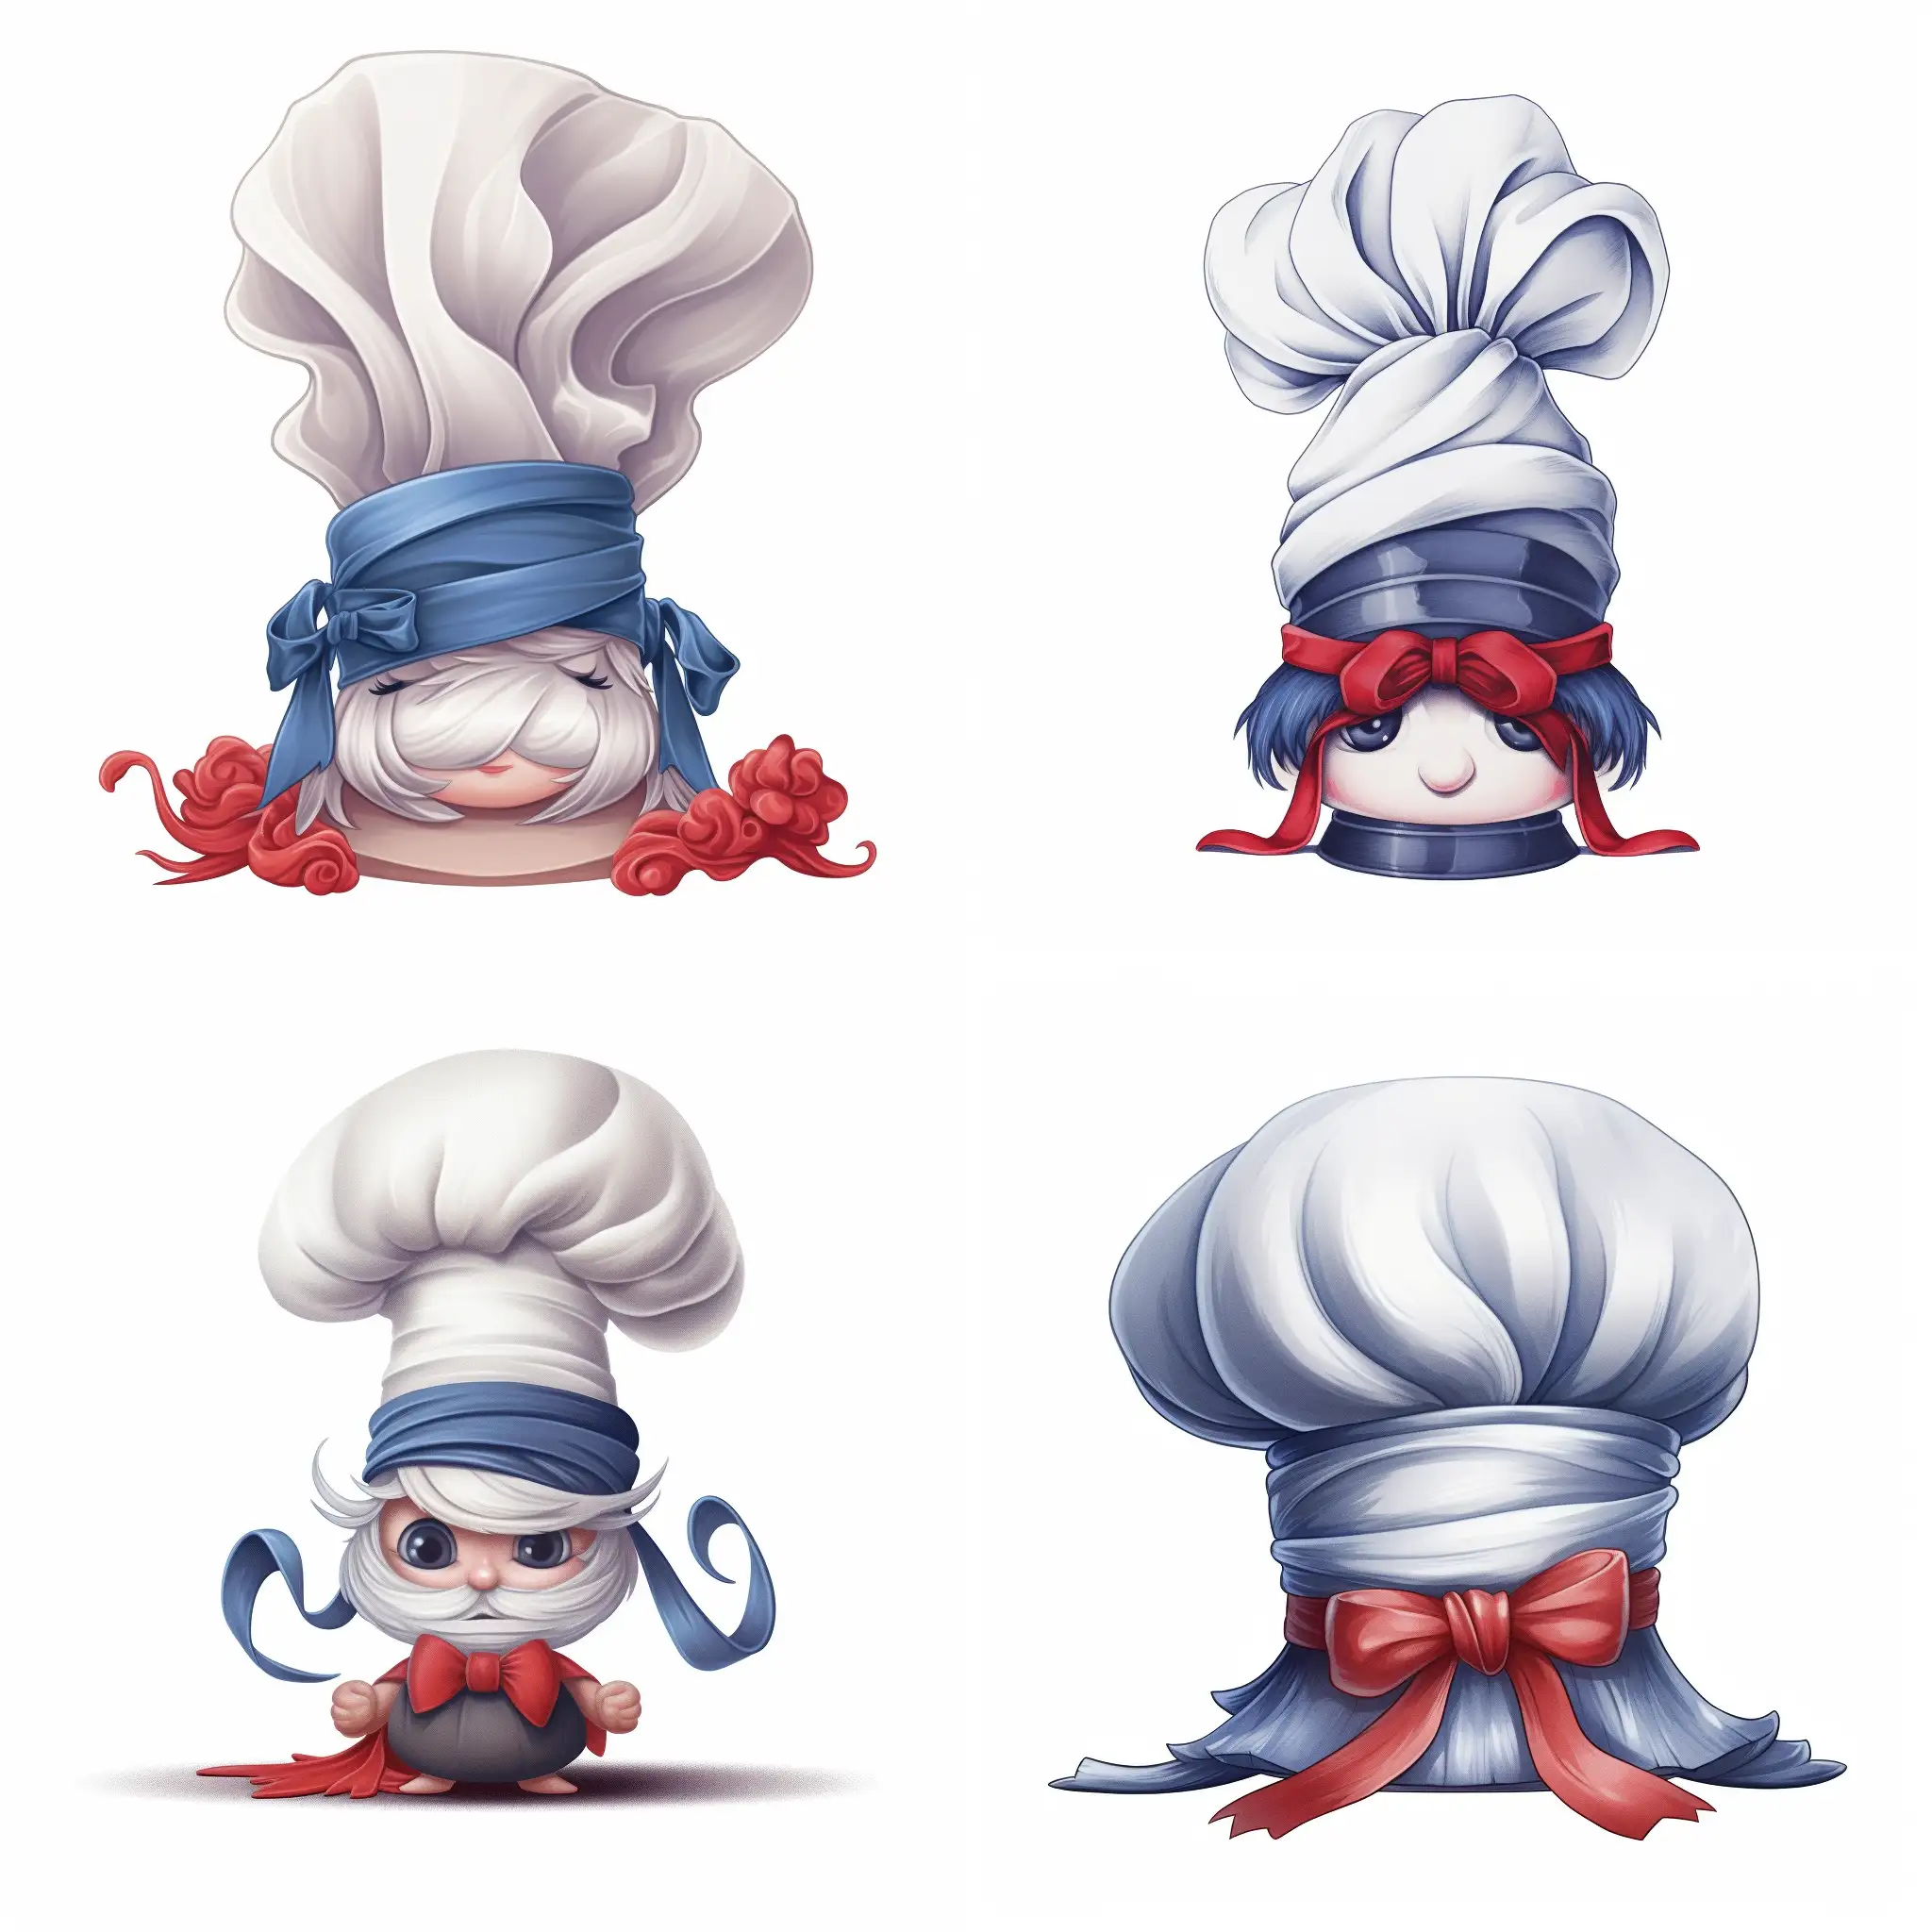 Adorable-Scandinavian-Gnome-Chef-with-Blue-Ribbons-in-Disney-Style